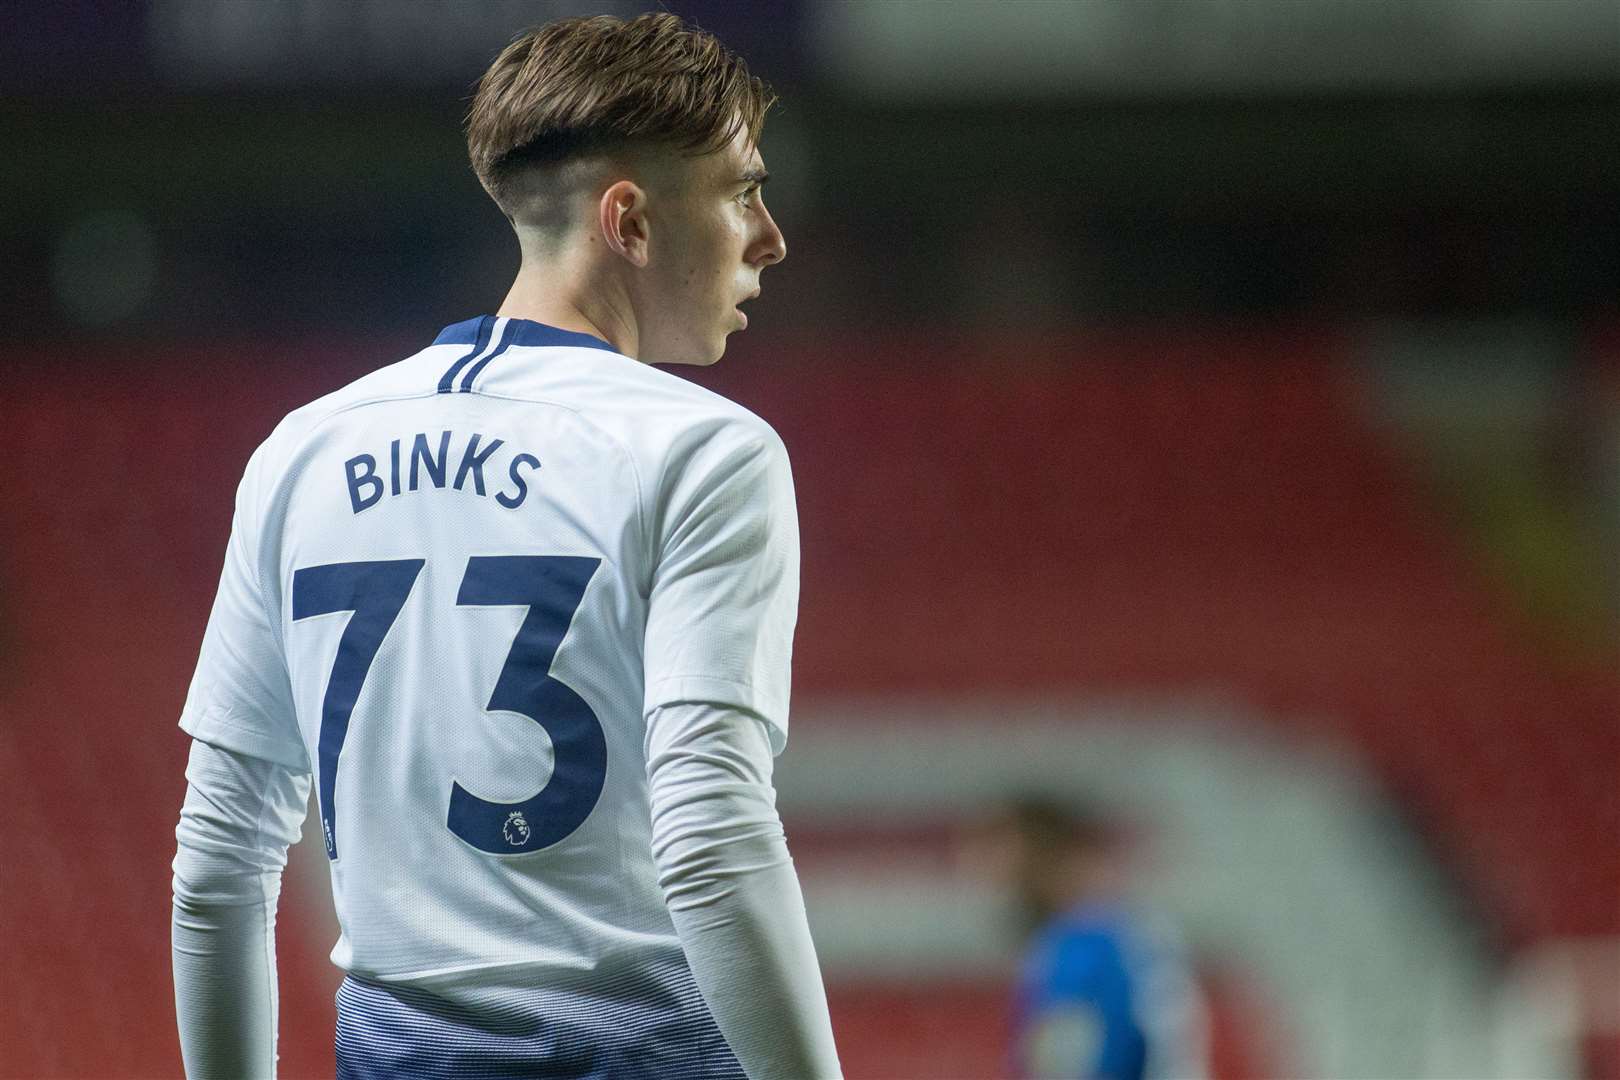 Luis Binks in action for Spurs u21s against Gillingham at The Valley in the EFL Trophy Picture: GFC